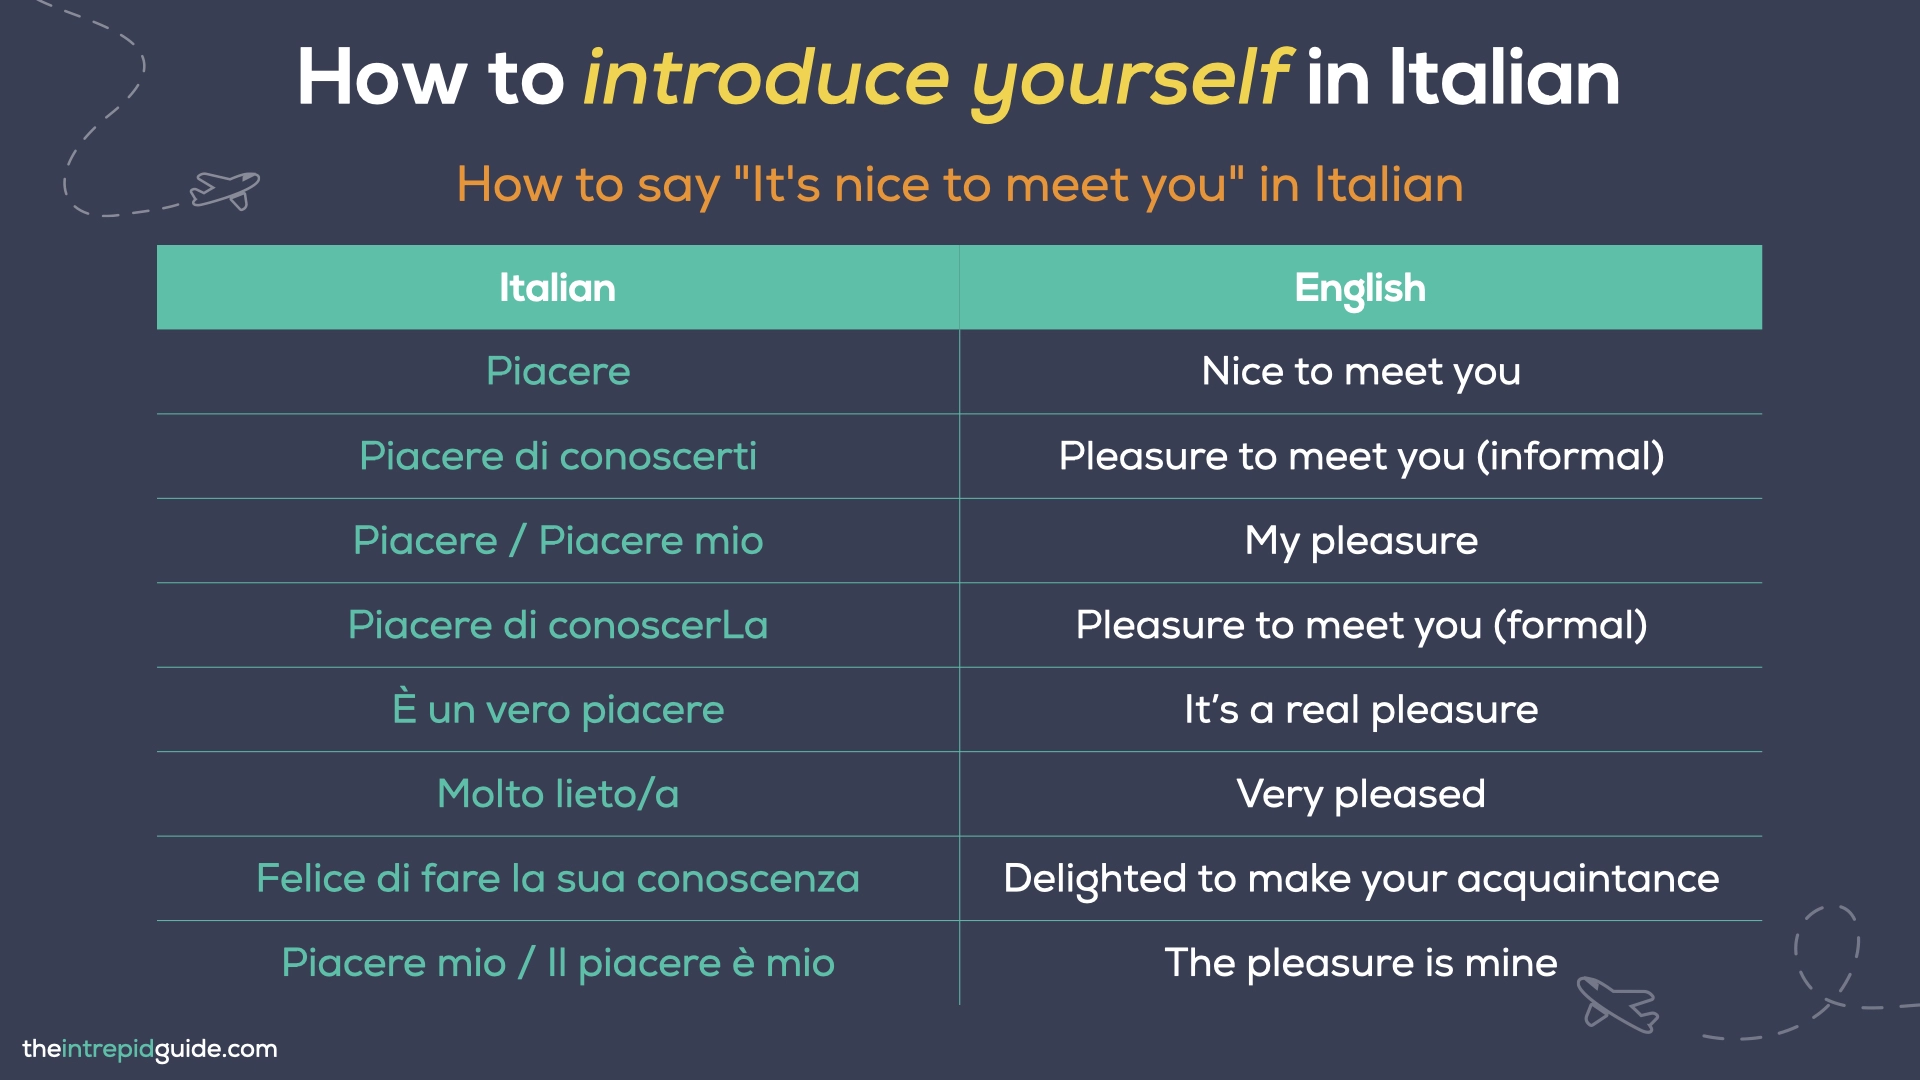 How to introduce yourself in Italian - How to say It's nice to meet you in Italian